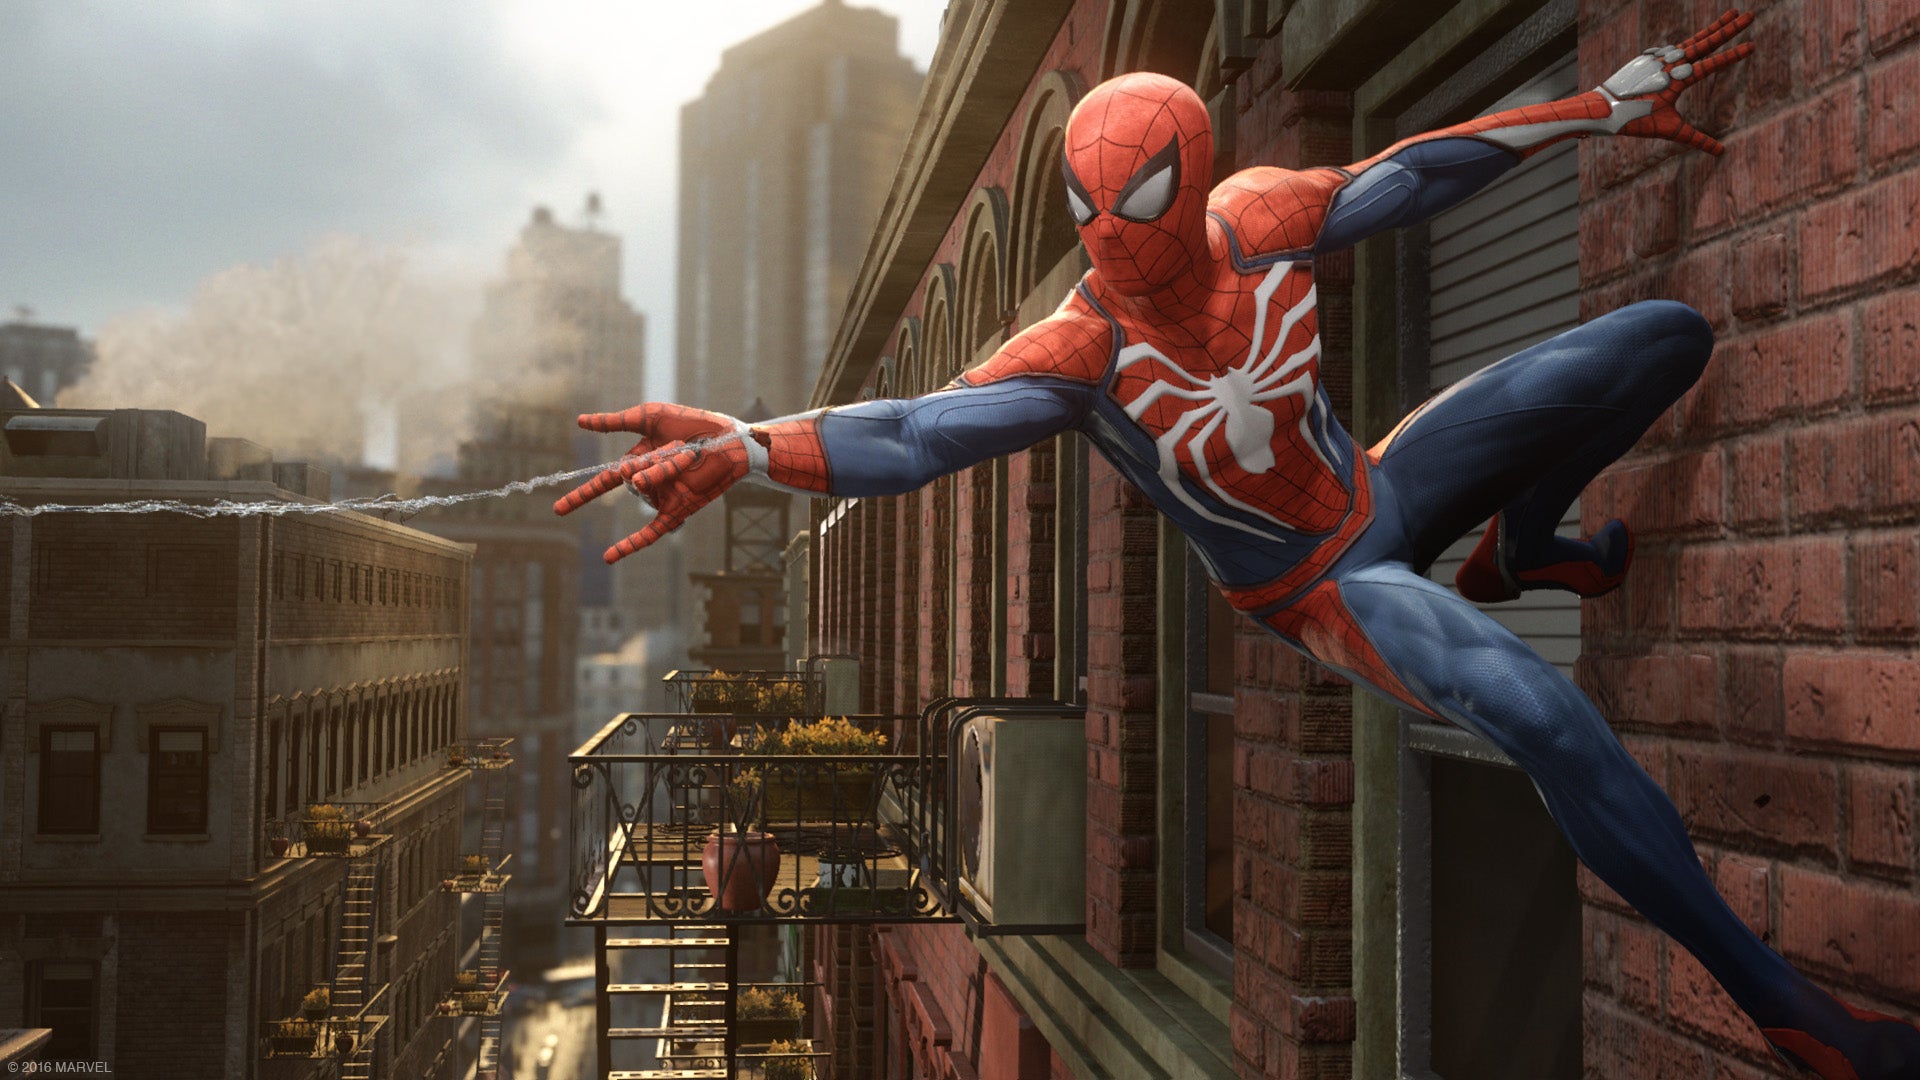 Image: Insomniac Games, Other